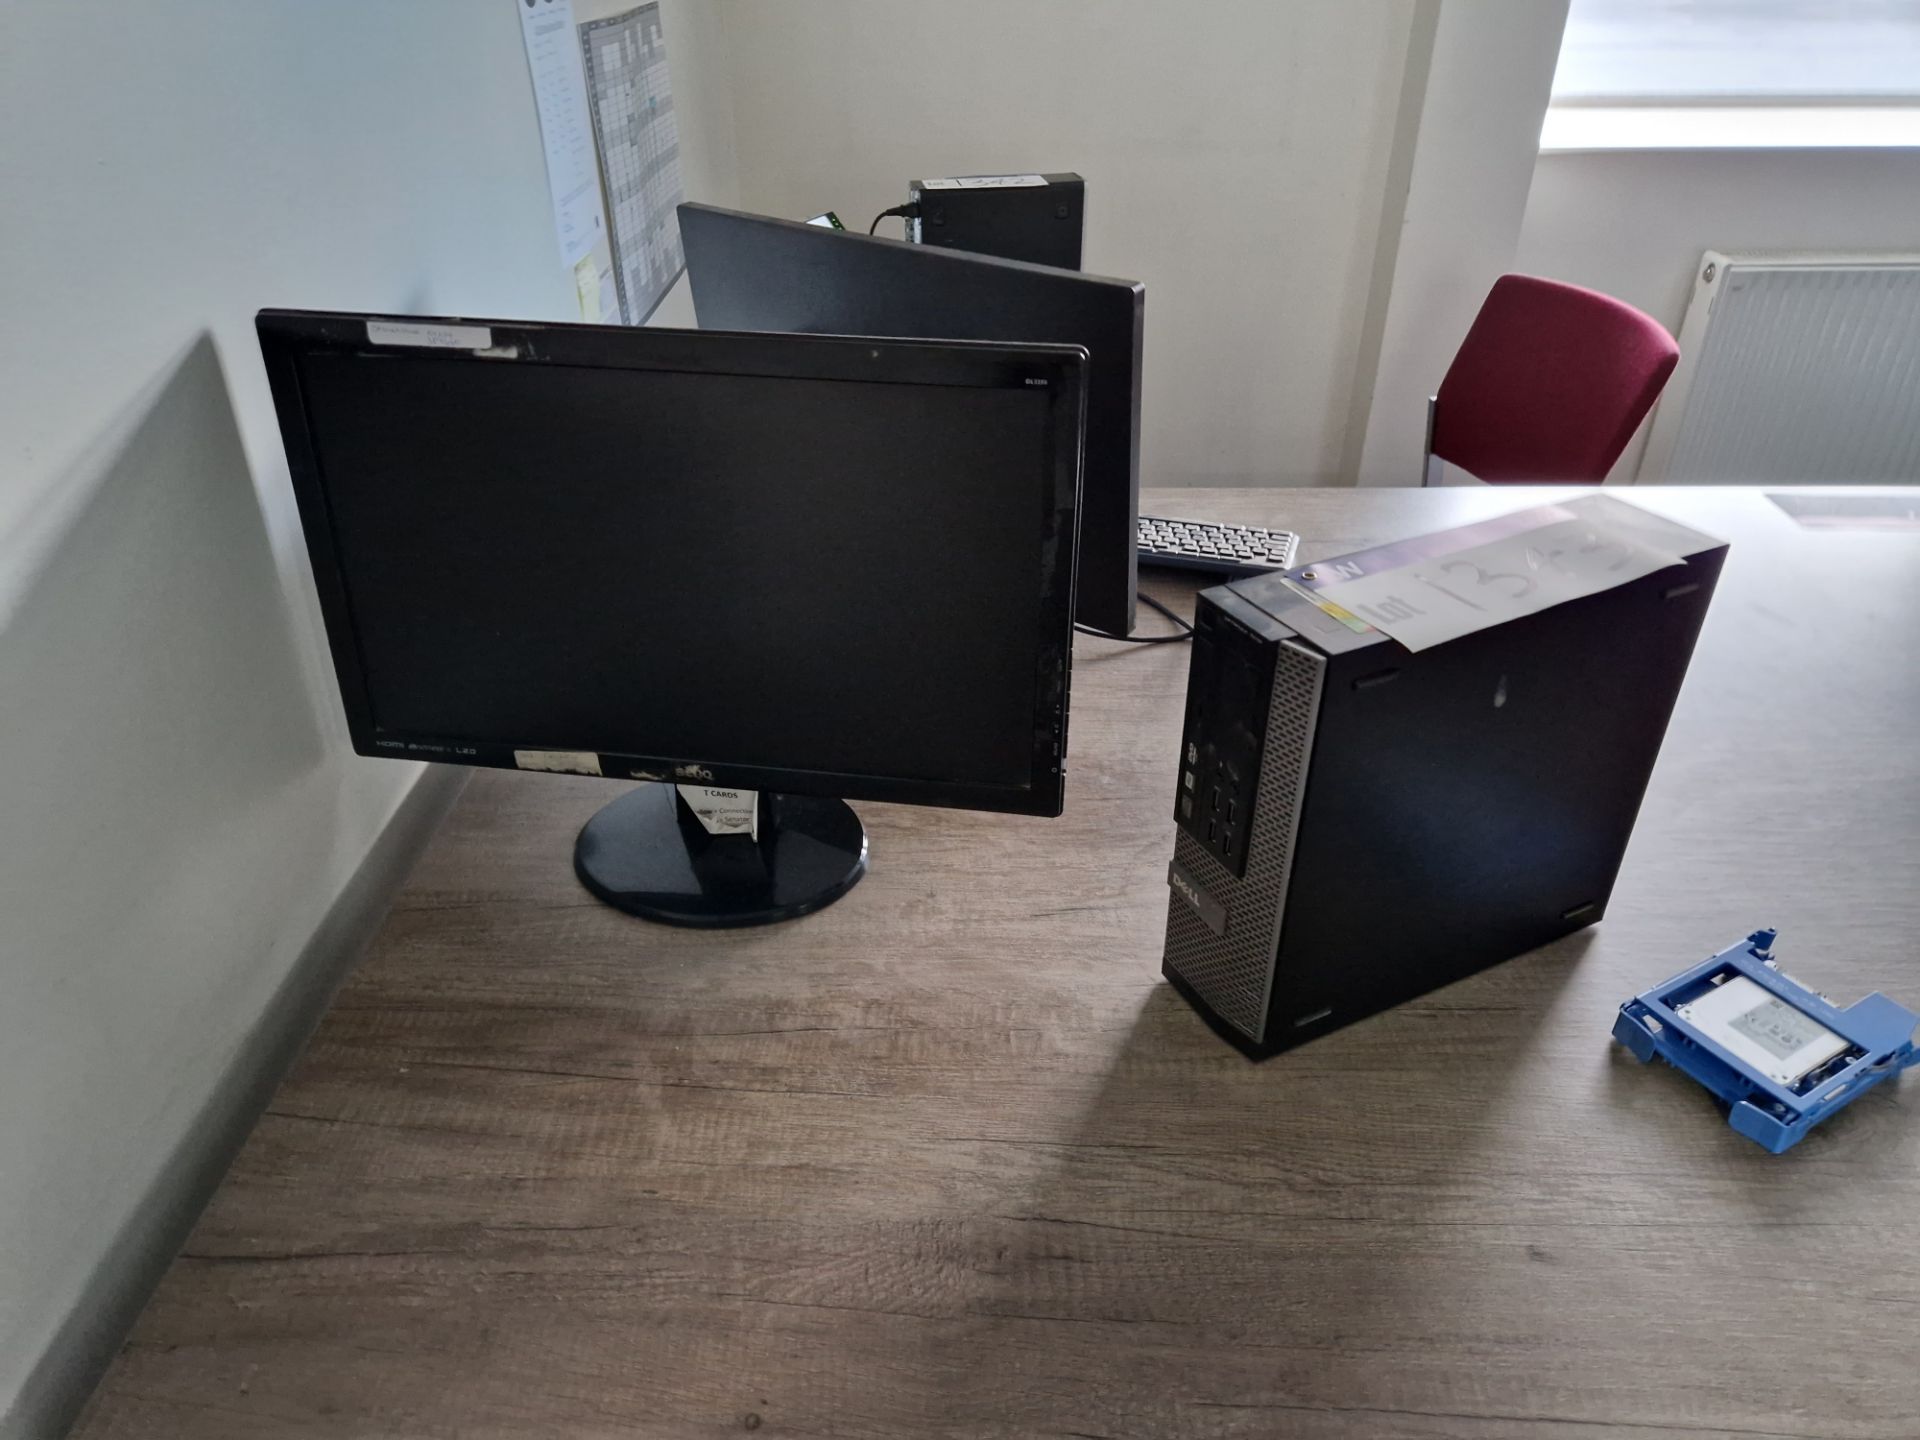 Dell Optiplex 7010 Desktop PC and Monitor (Hard Drive Removed) Please read the following important